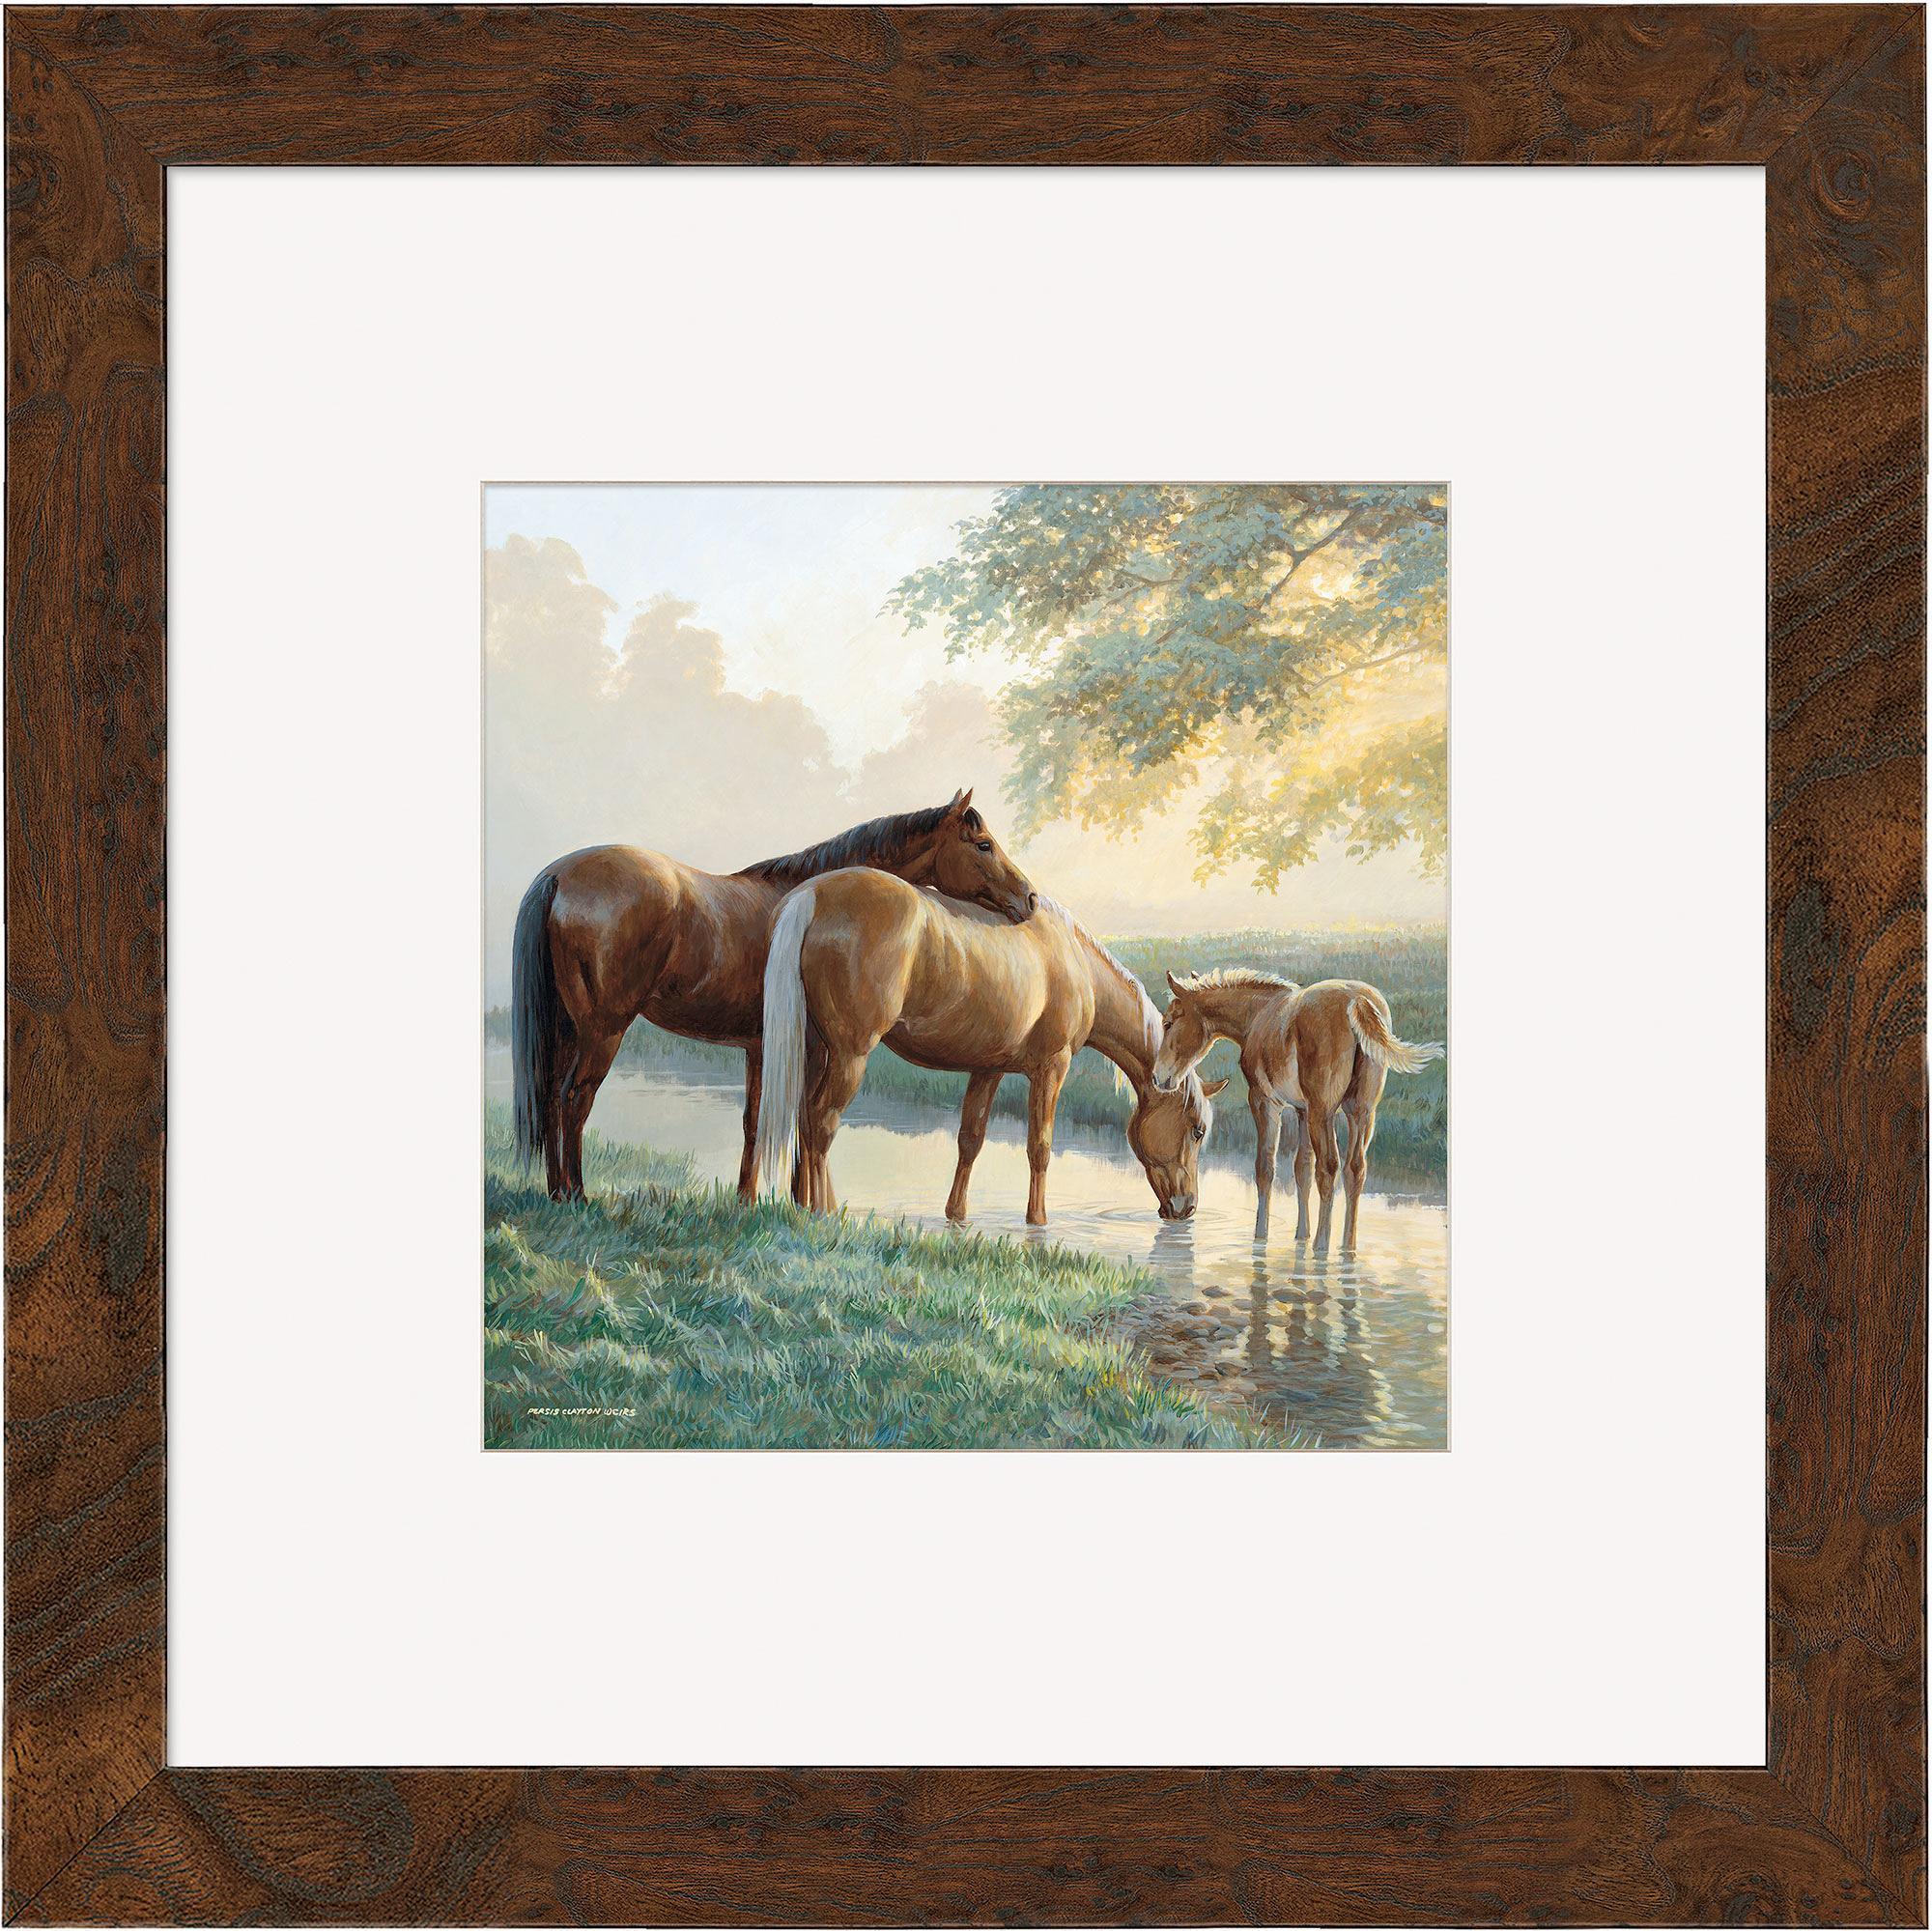 Spring Morning—Horses Contempo Square - Wild Wings